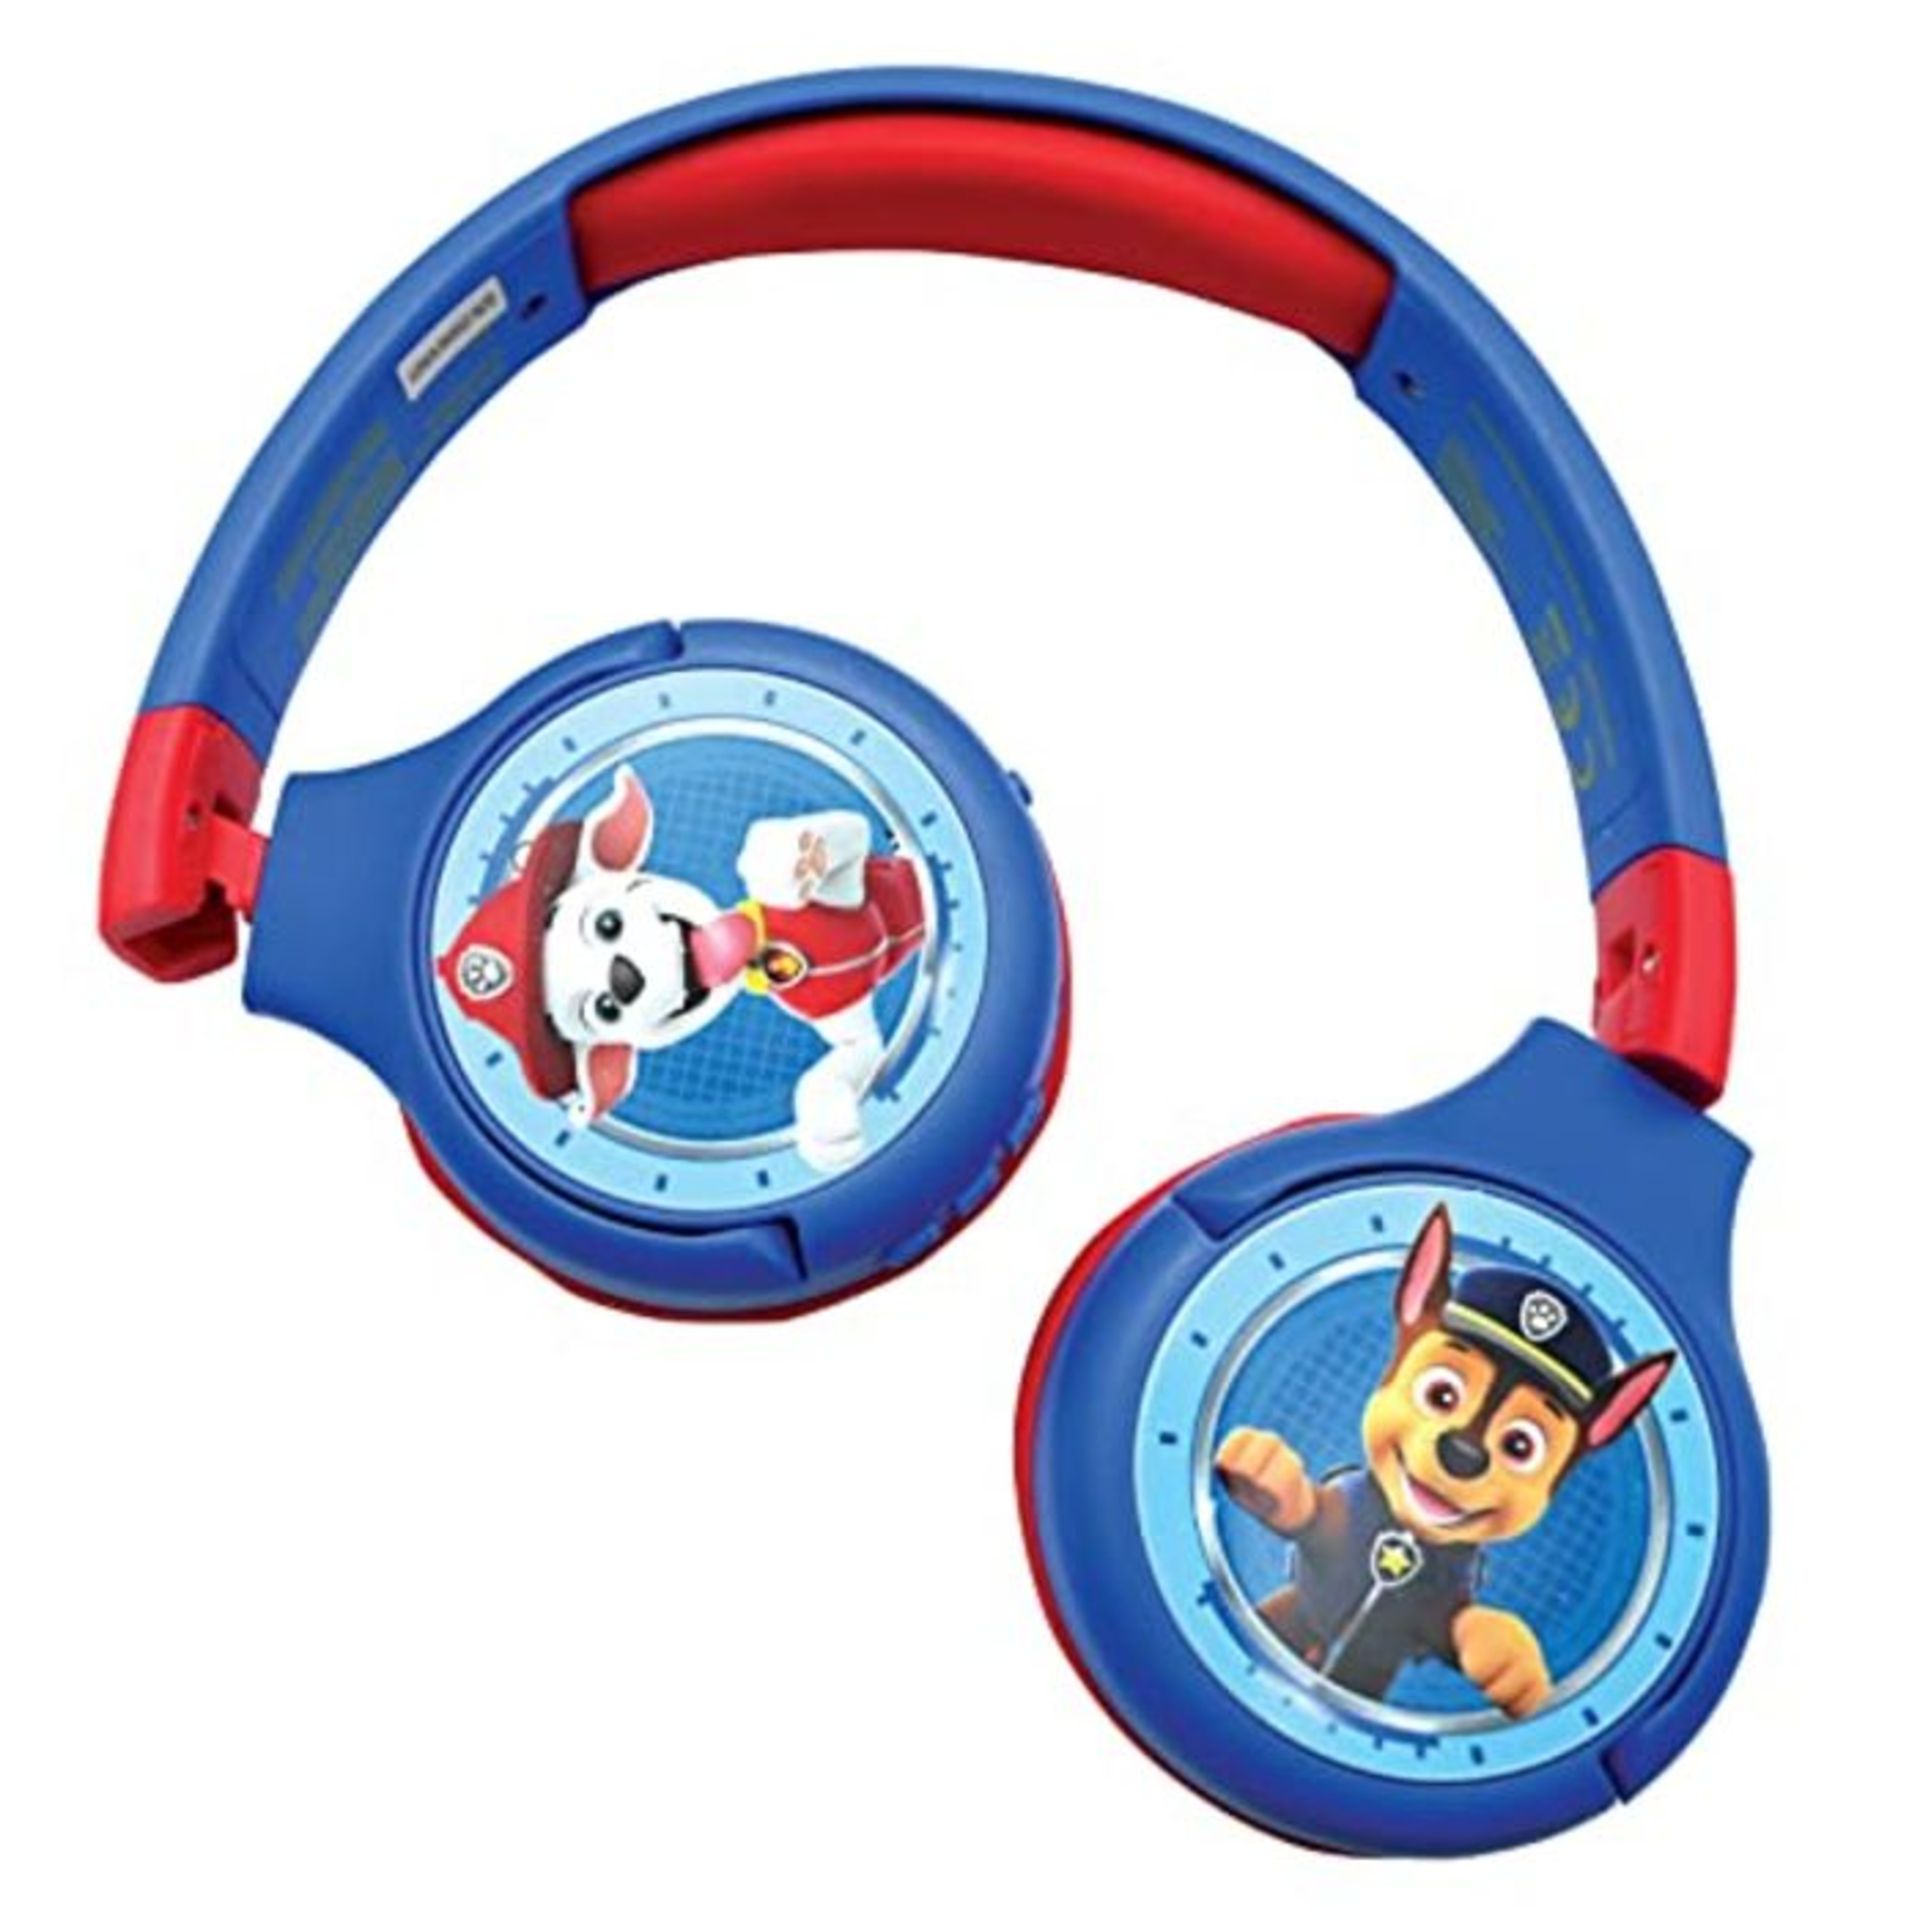 [CRACKED] LEXIBOOK HPBT010PA Paw Patrol 2-in-1 Bluetooth Headphones Stereo Wireless Wi